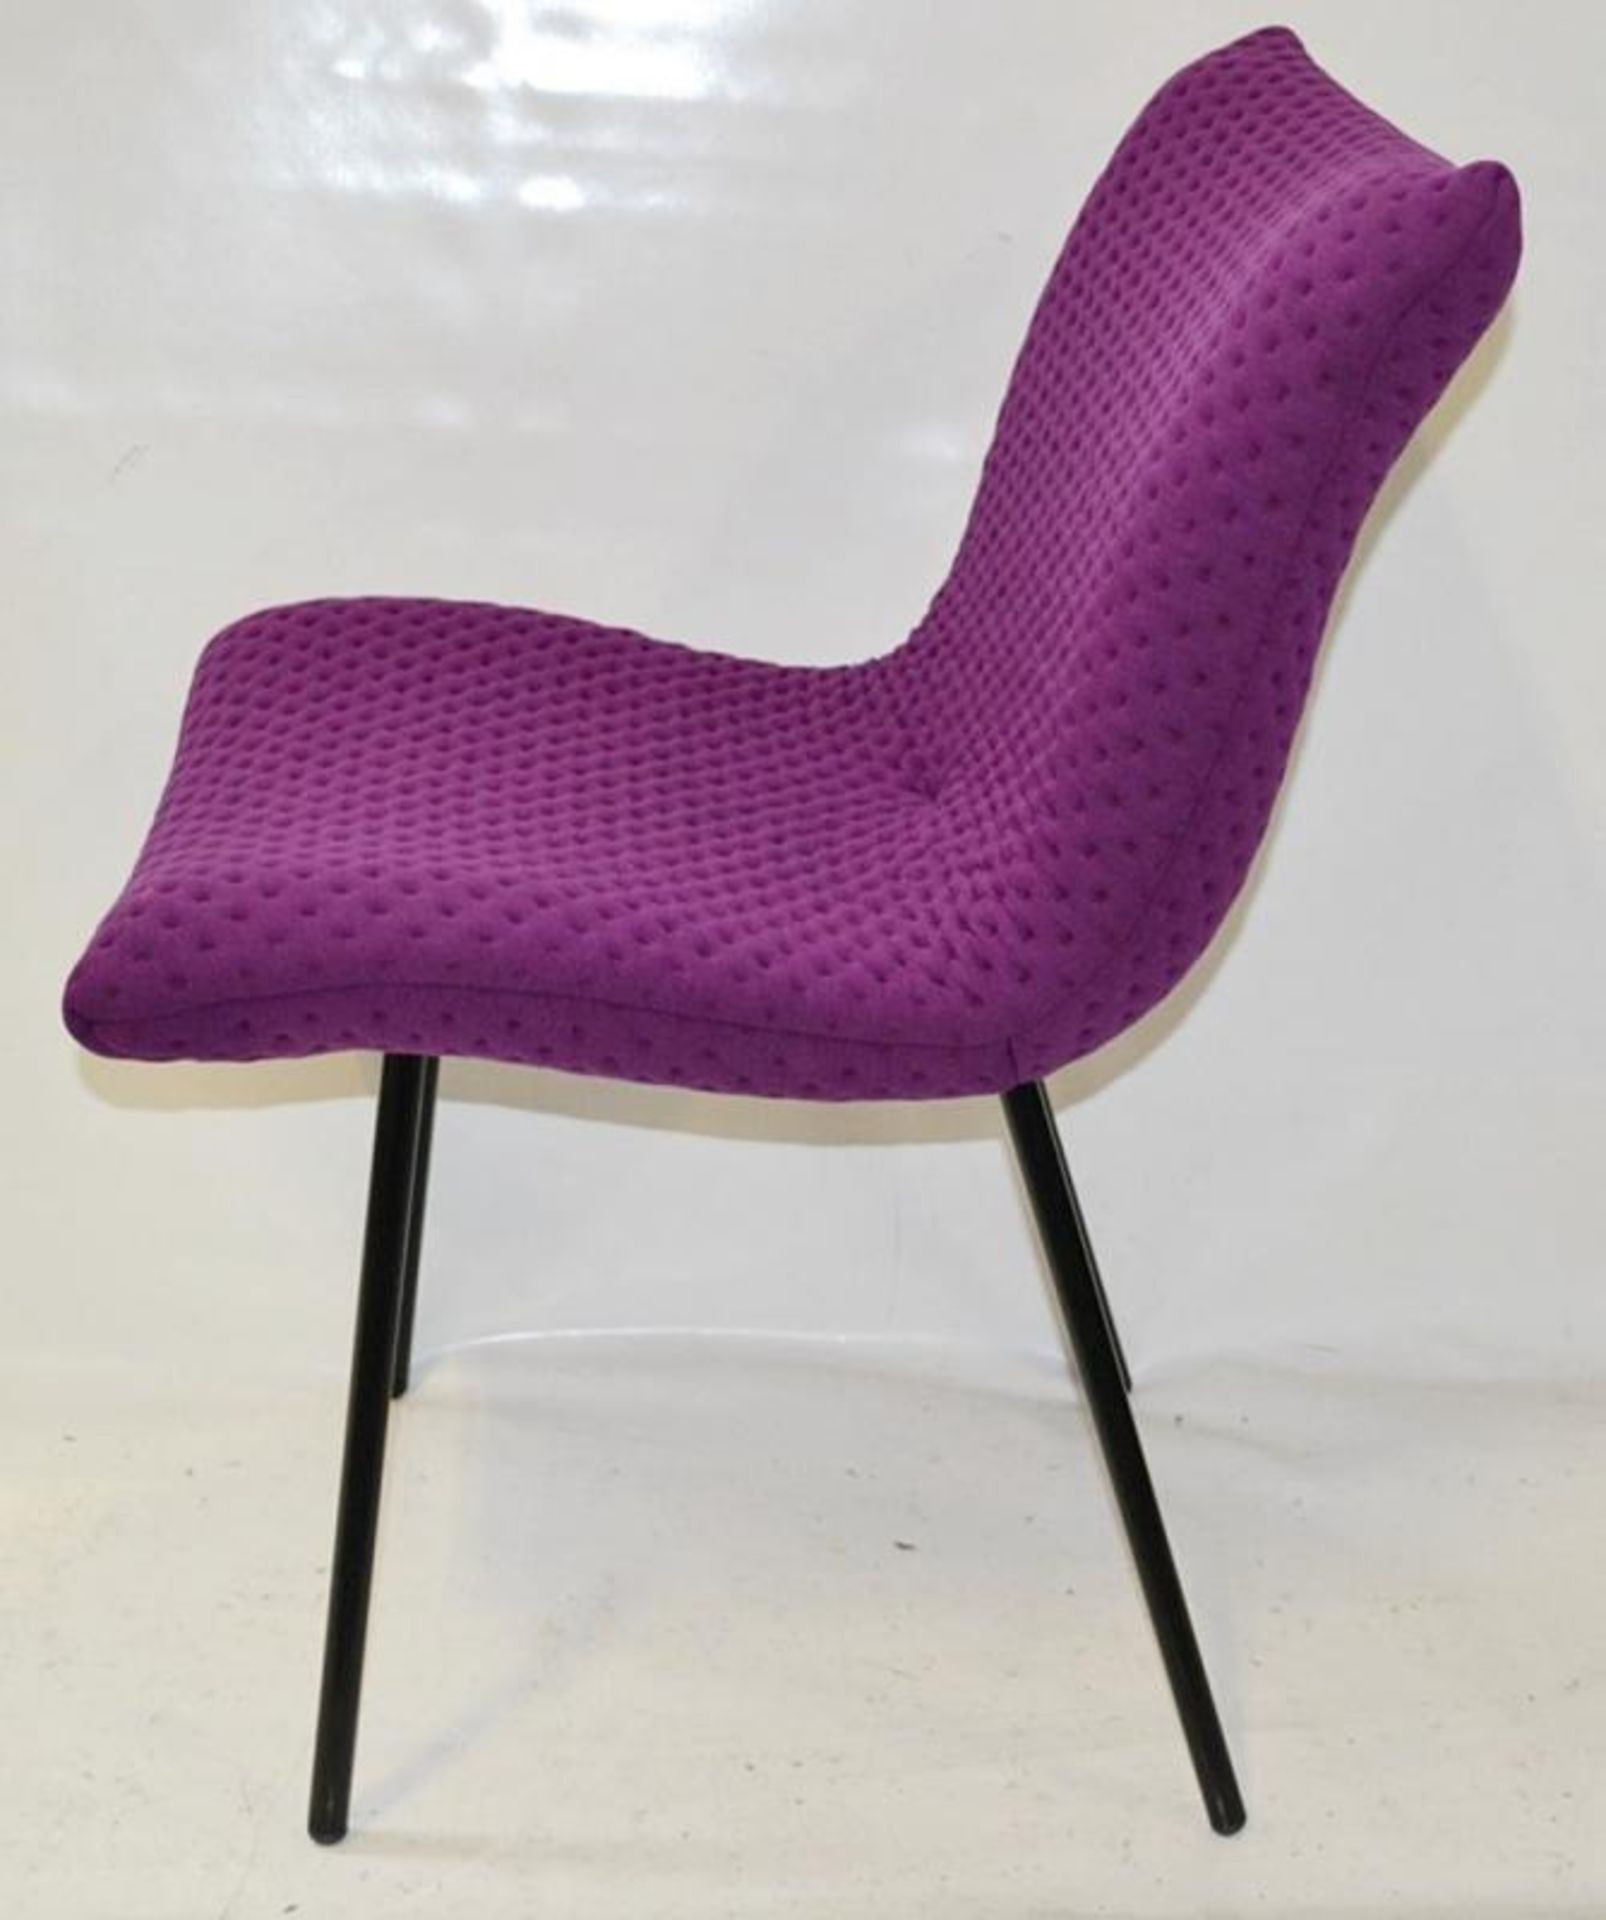 1 x Ligne Roset 'Calin' Chair - Features Bright Purple Upholsterey - Made In France - Ref: 6206608 P